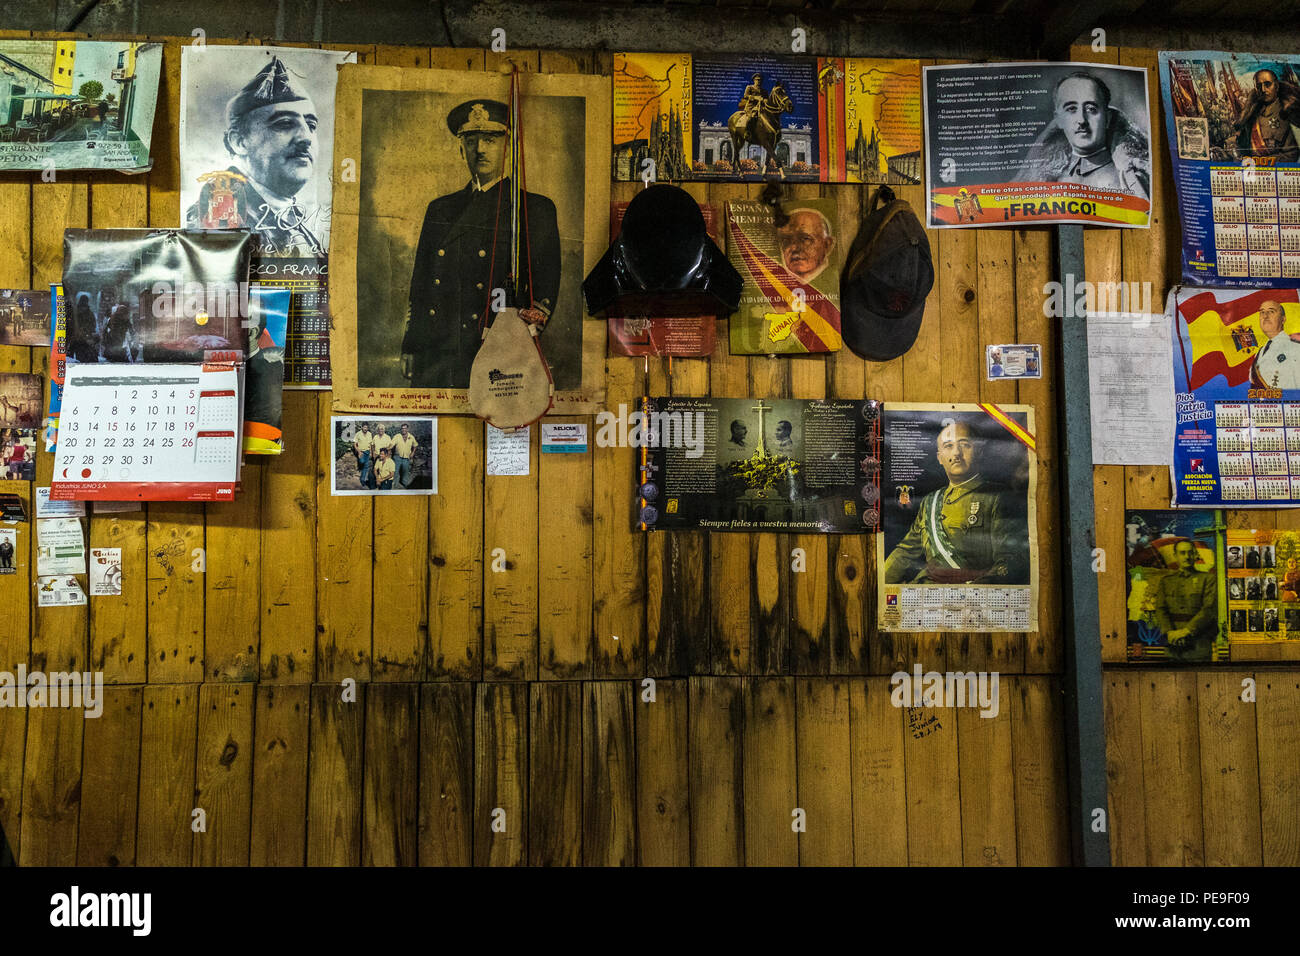 Wall of a Guachinche bar, restaurant, decorated with Franco paraphanelia, photographs and calendars, Valle grande, Anaga, Tenerife, Canary Islands, Stock Photo